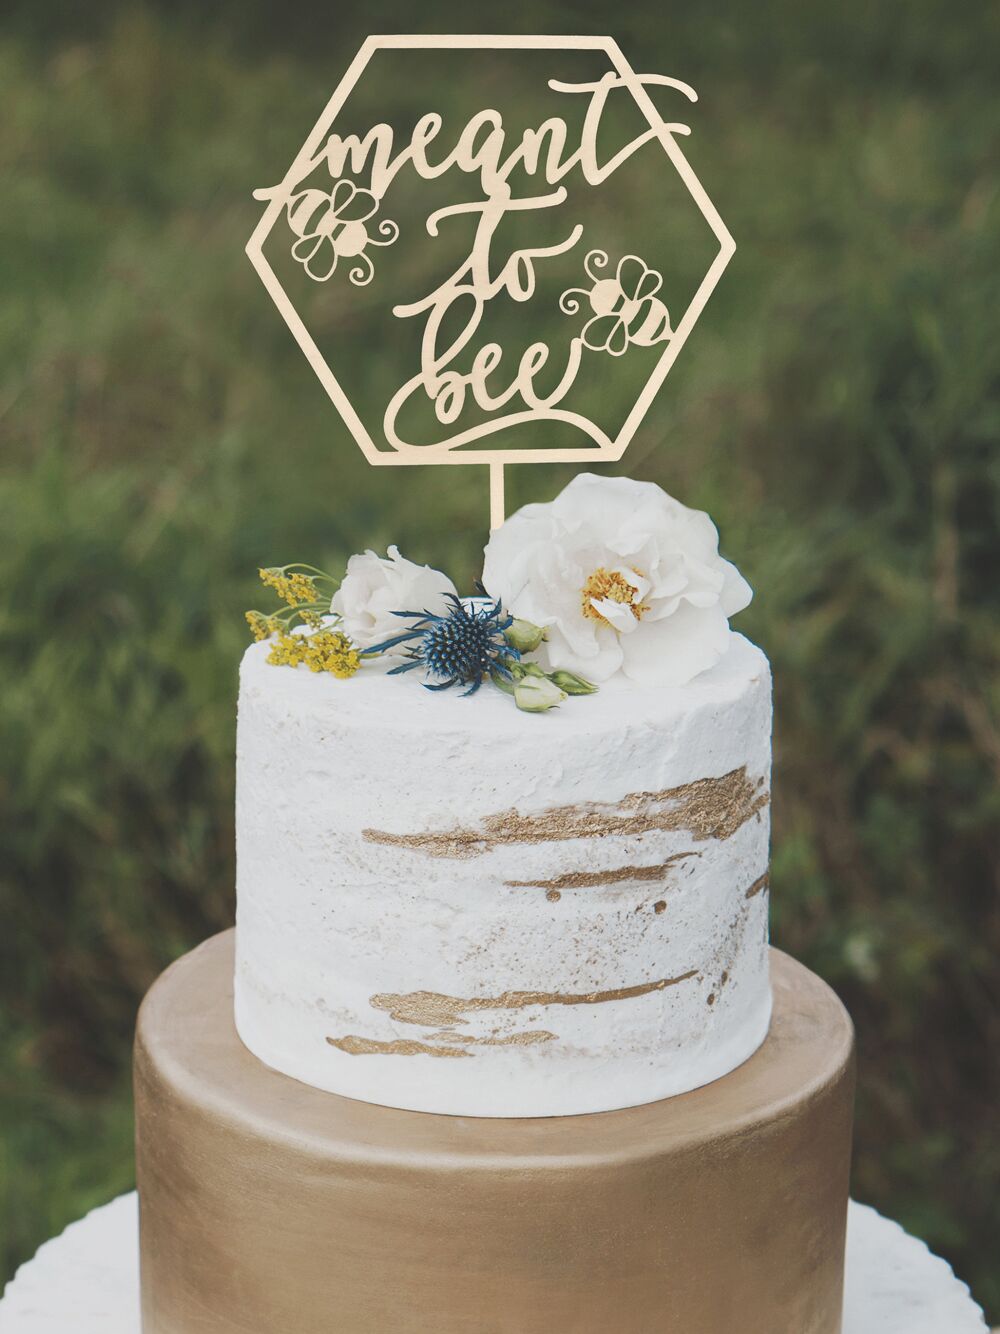 Meant to Bee unique wedding cake topper